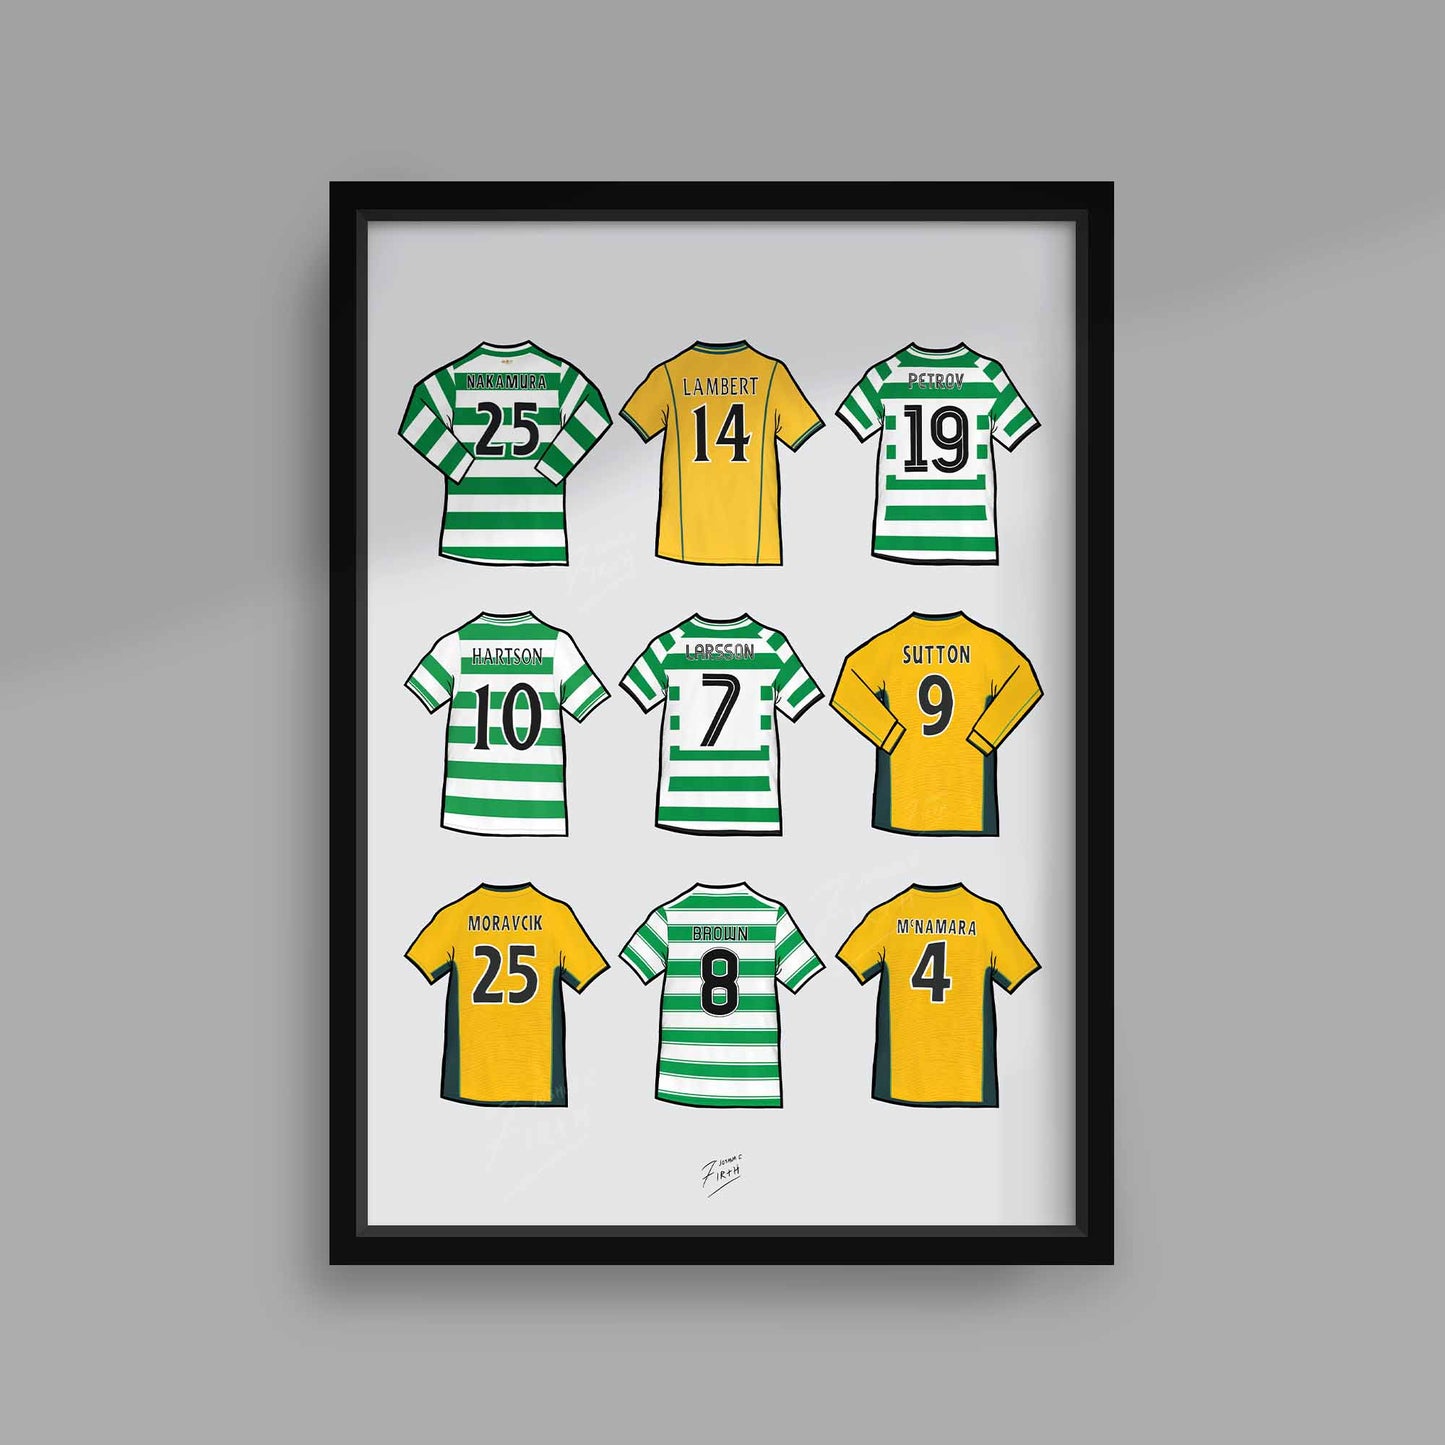 Inspired by the legends of Glasgow Celtic. Shirts which include names such as Nakamura, Paul Lambert, Chris Sutton, Scott Brown, Henrik Larsson & more!